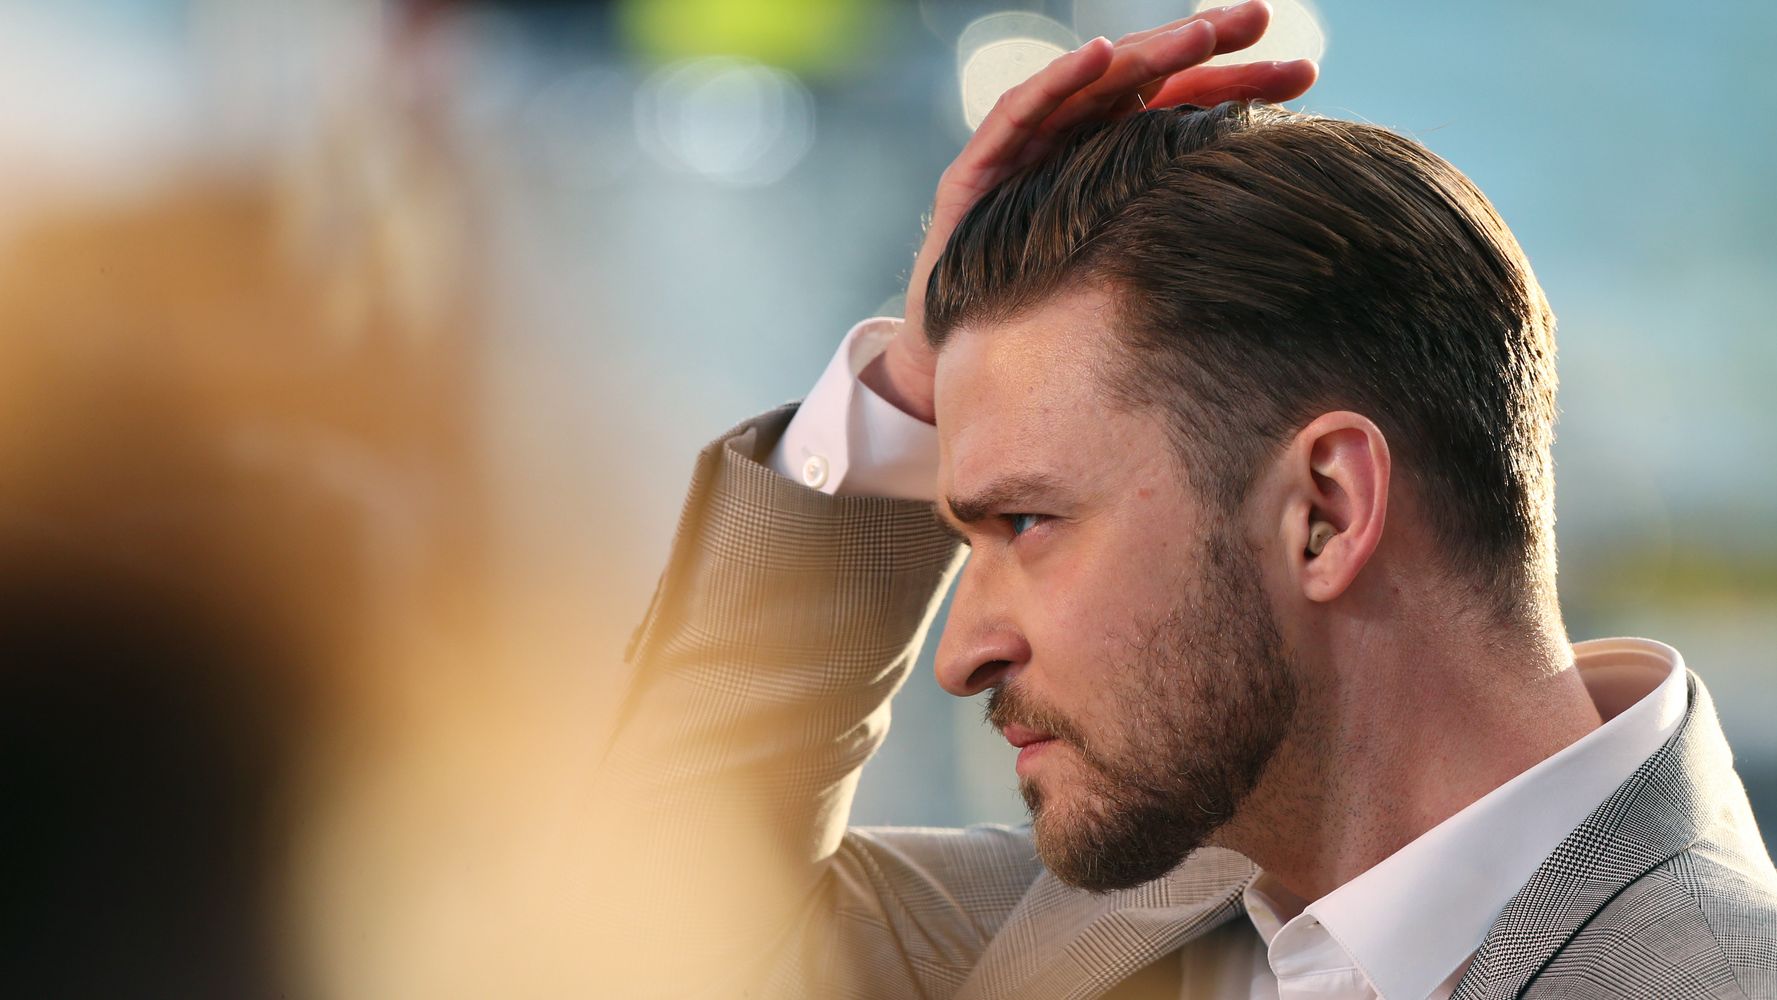 Show These Short Men's Hairstyles To Your Barber | HuffPost Life